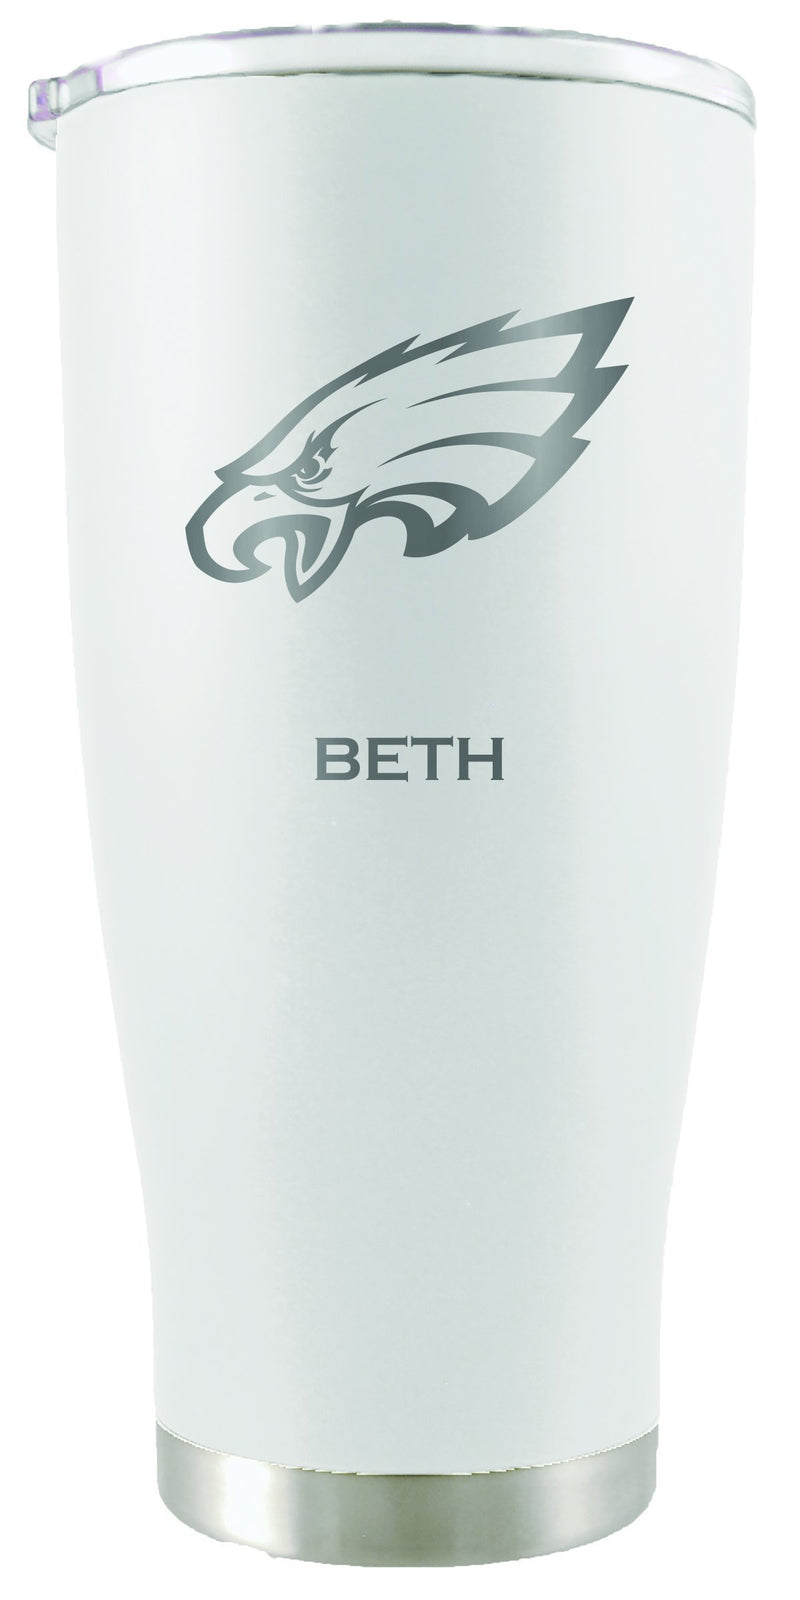 20oz White Personalized Stainless Steel Tumbler | Philadelphia Eagles
20oz, CurrentProduct, Drinkware_category_All, NFL, PEG, Personalized_Personalized, Philadelphia Eagles
The Memory Company